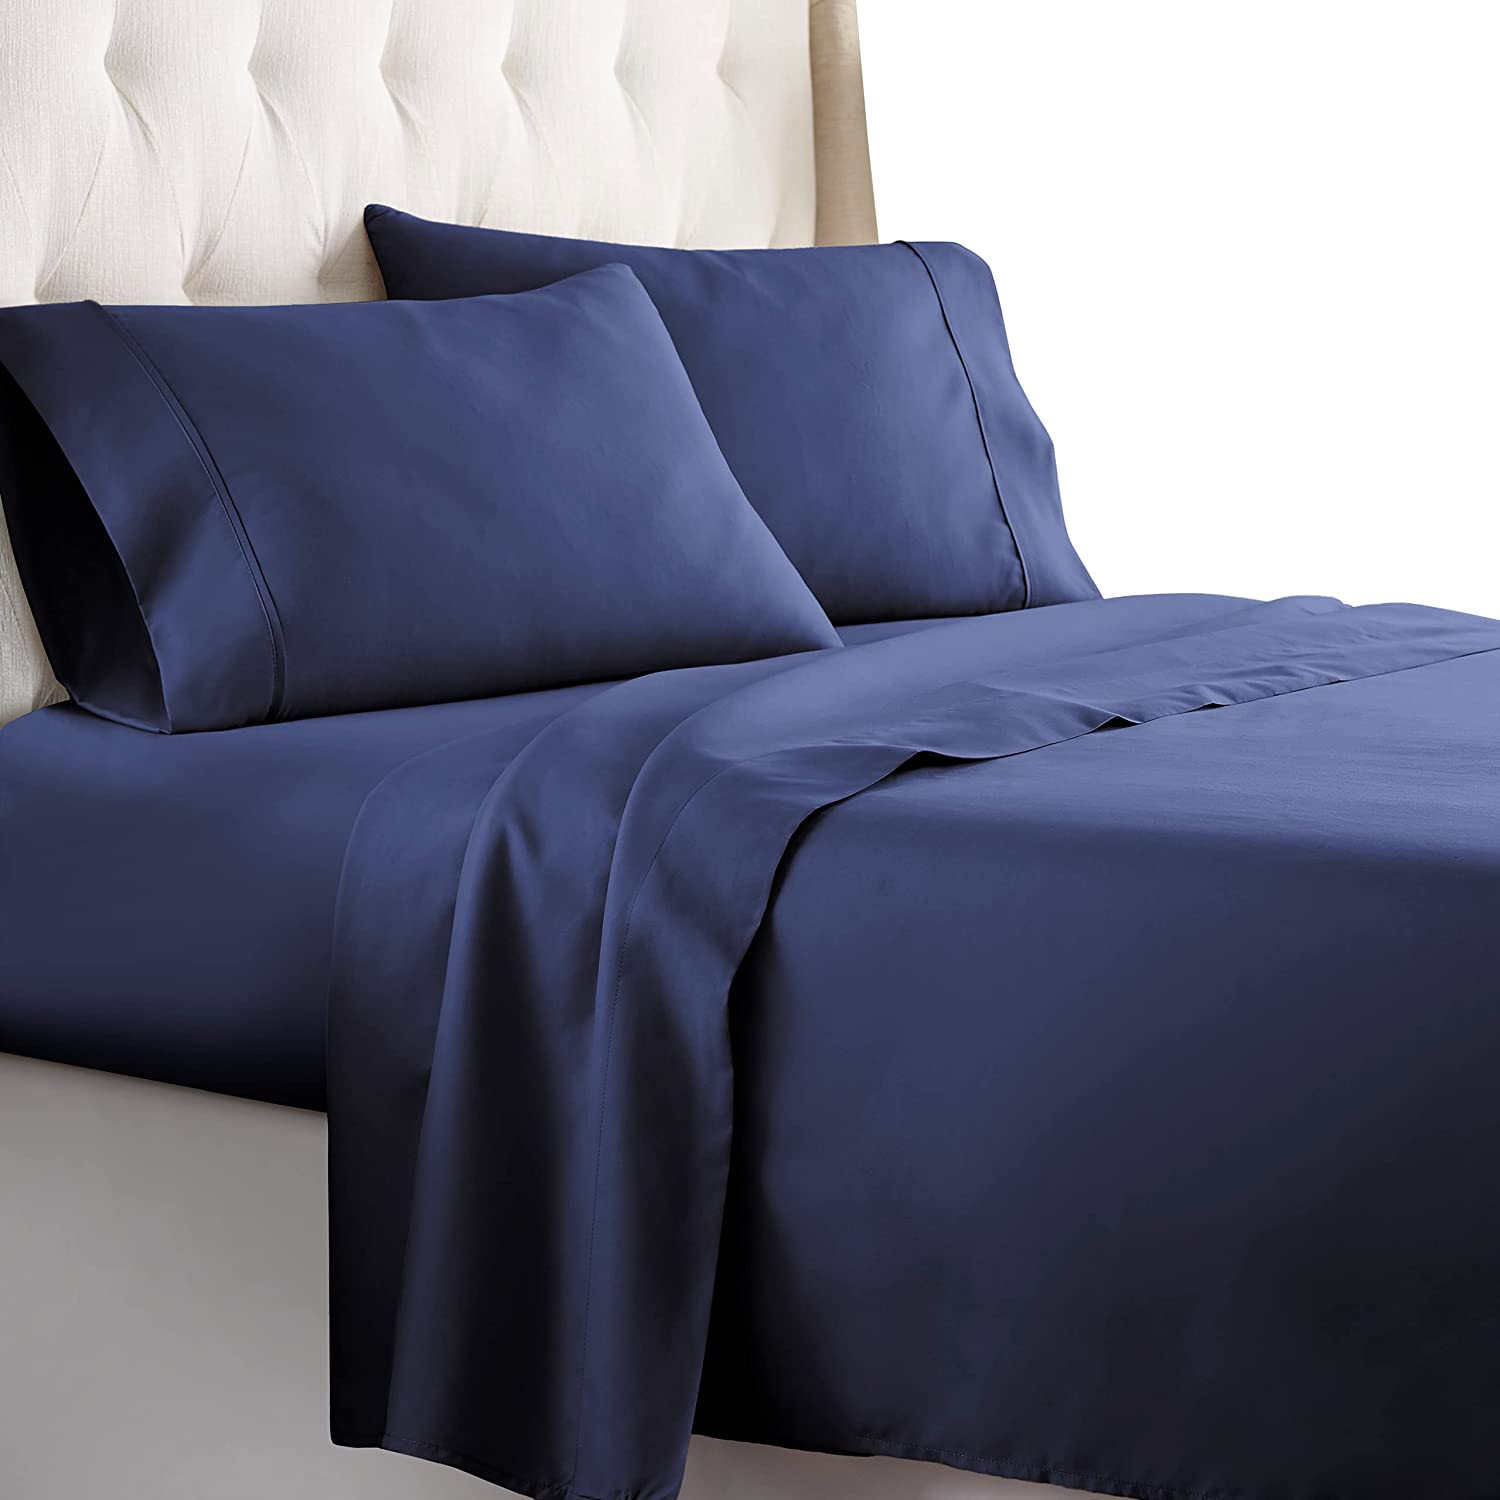 Shop for 1000TC Navy Blue Stripe Sheet Set Egyptian Cotton All Sizes at- Egyptianhomelinens.com